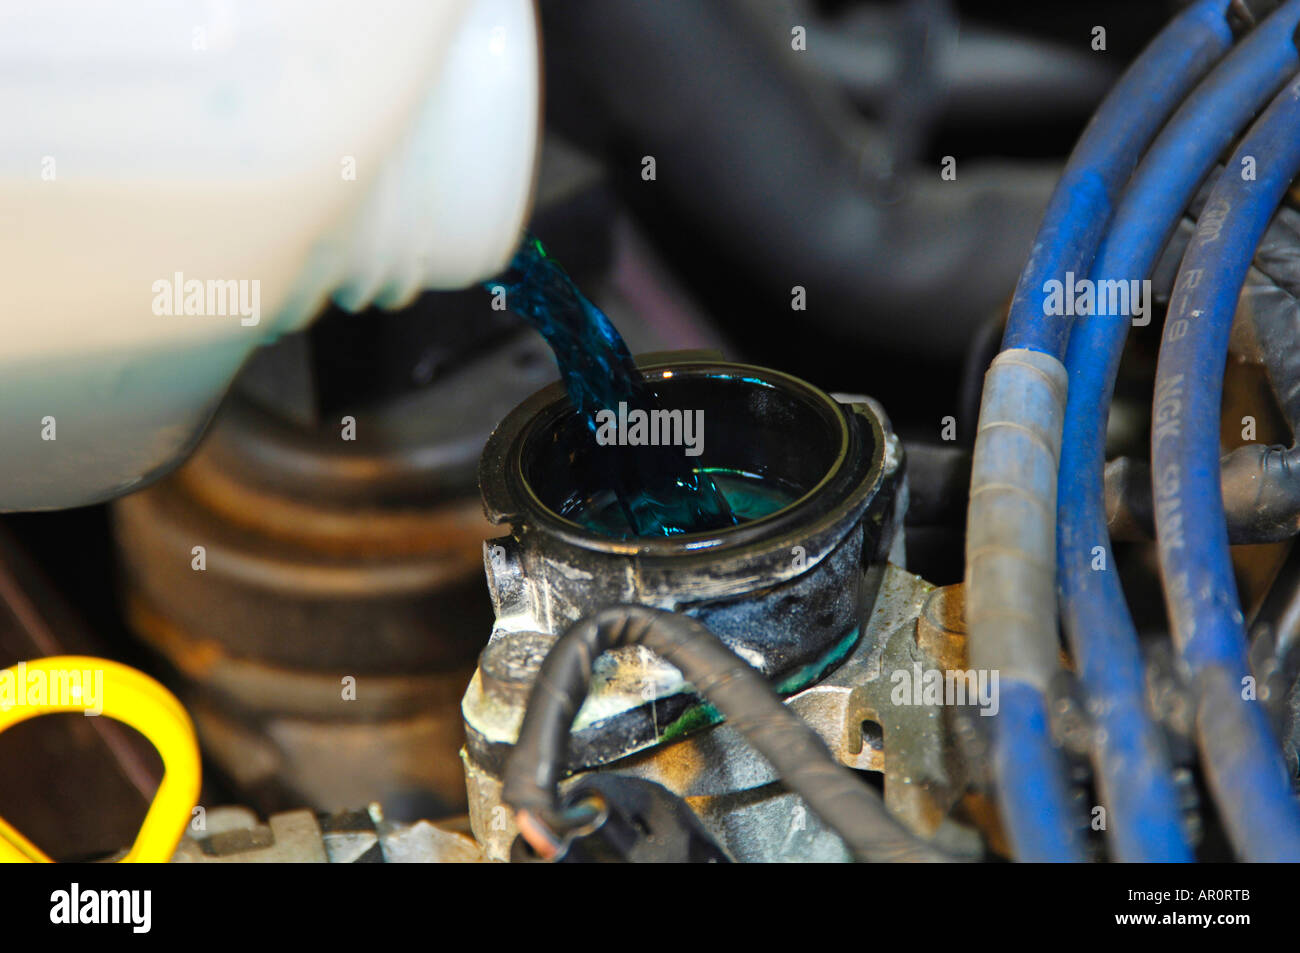 Refilling coolant in an engine Stock Photo